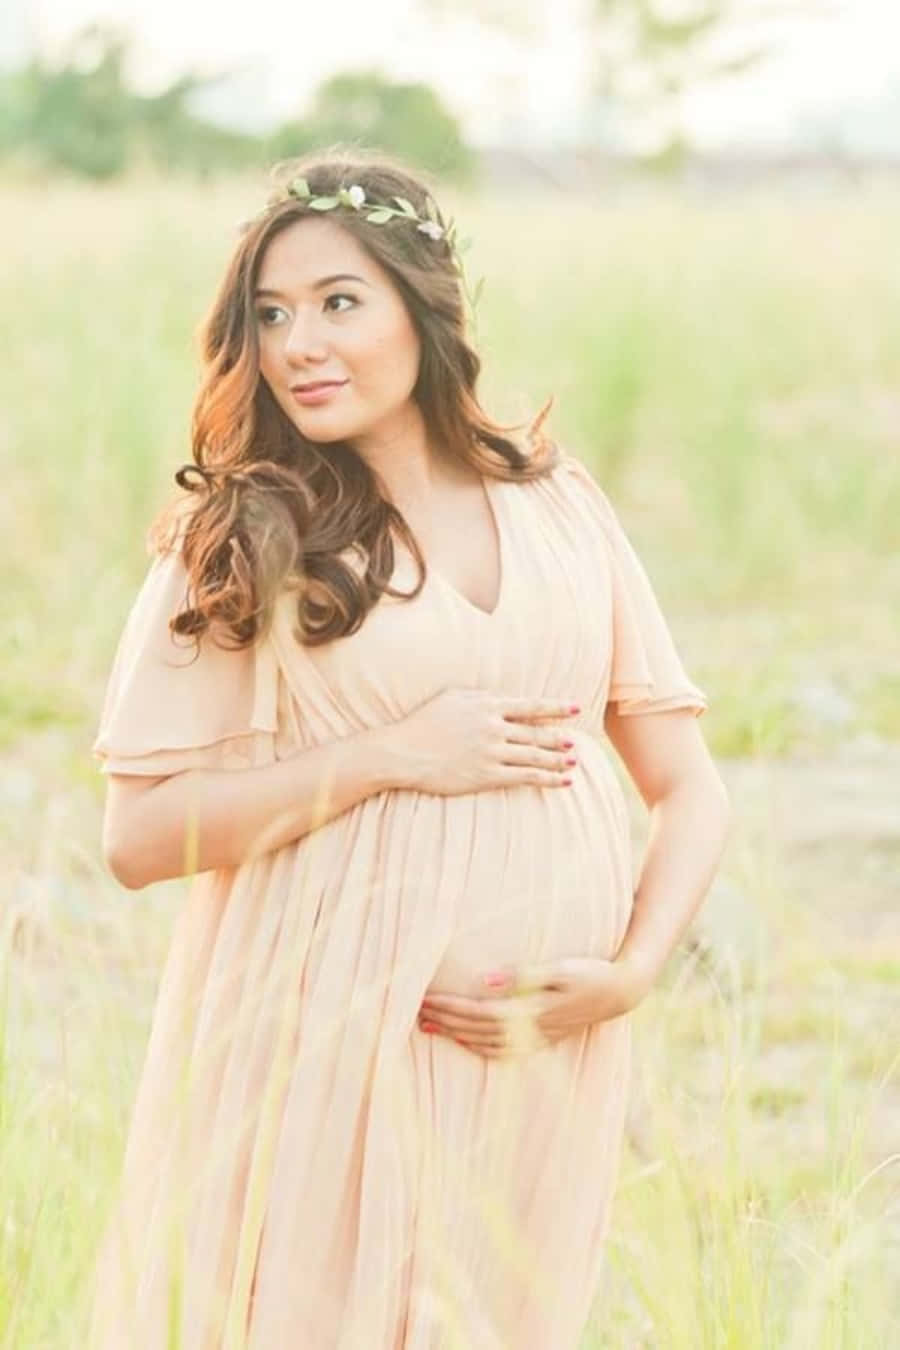 A Pregnant Woman In A Pink Dress Standing In A Field